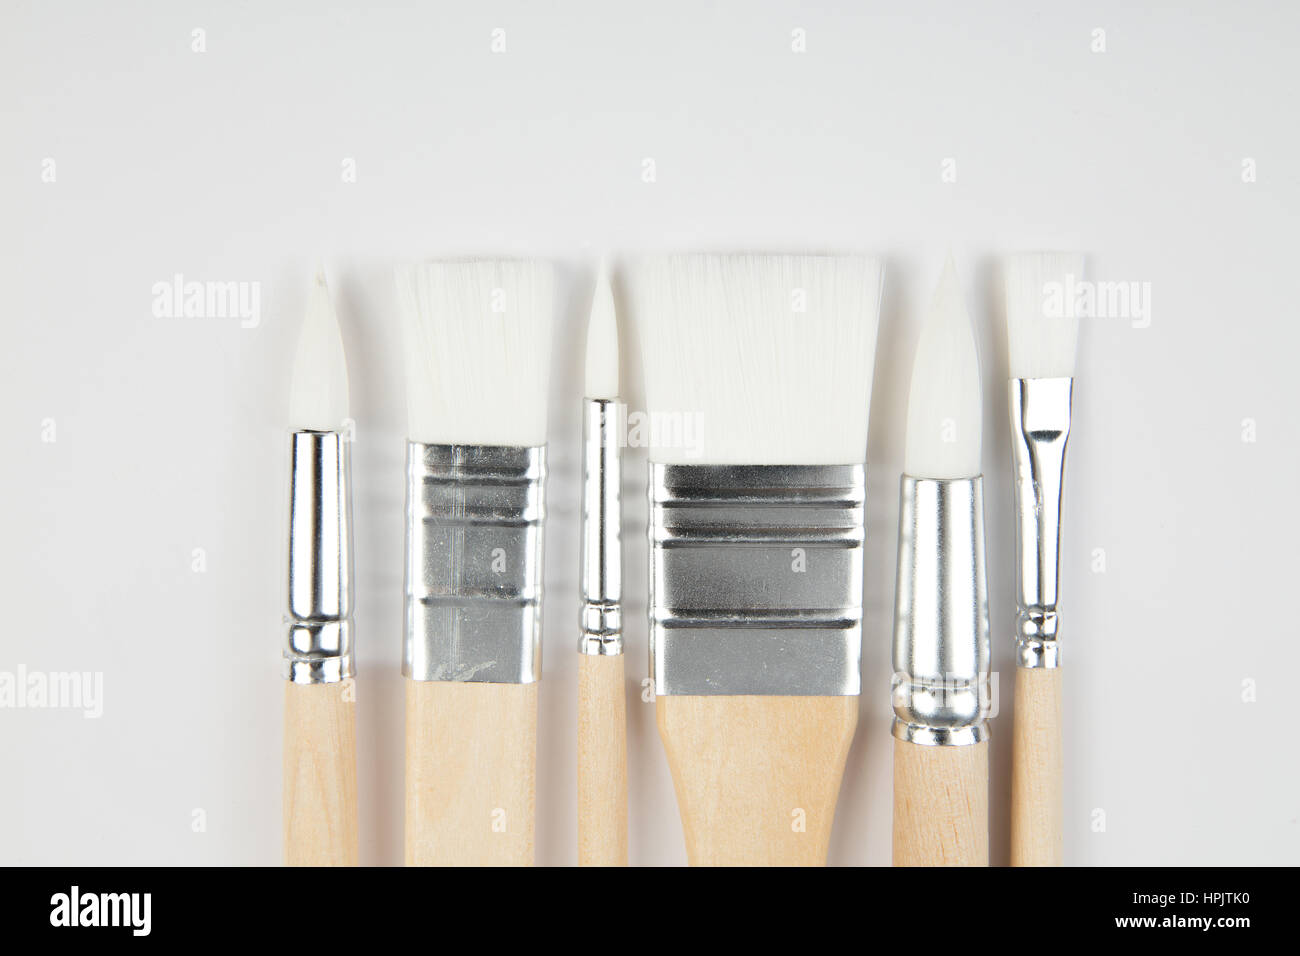 White paintbrushes with wooden handle on clear background Stock Photo